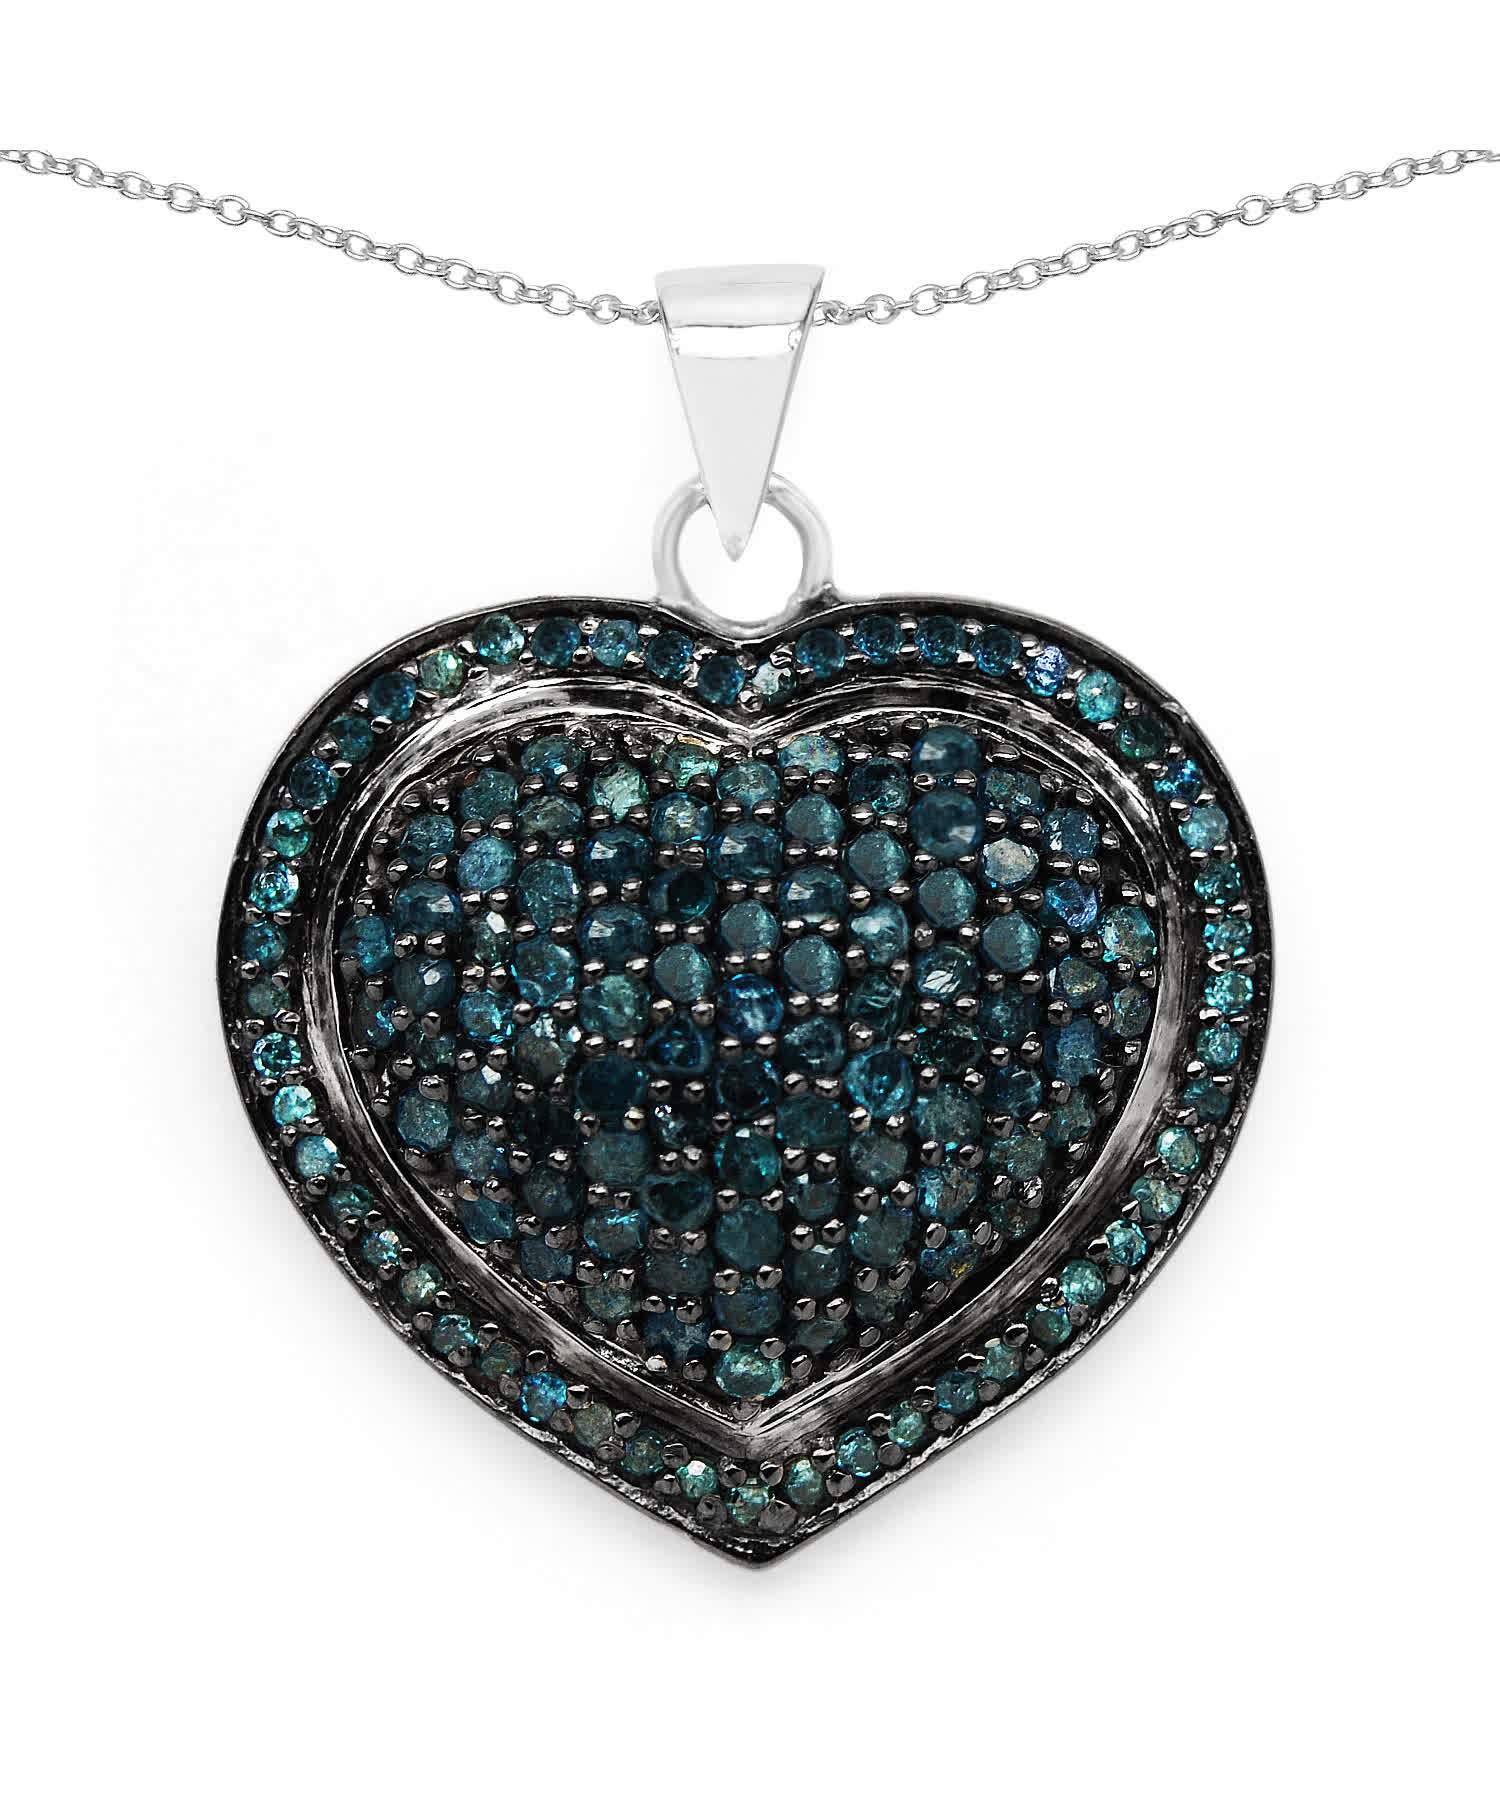 1.25ctw Fancy Blue Diamond Rhodium Plated 925 Sterling Silver Heart Pendant With Chain View 1